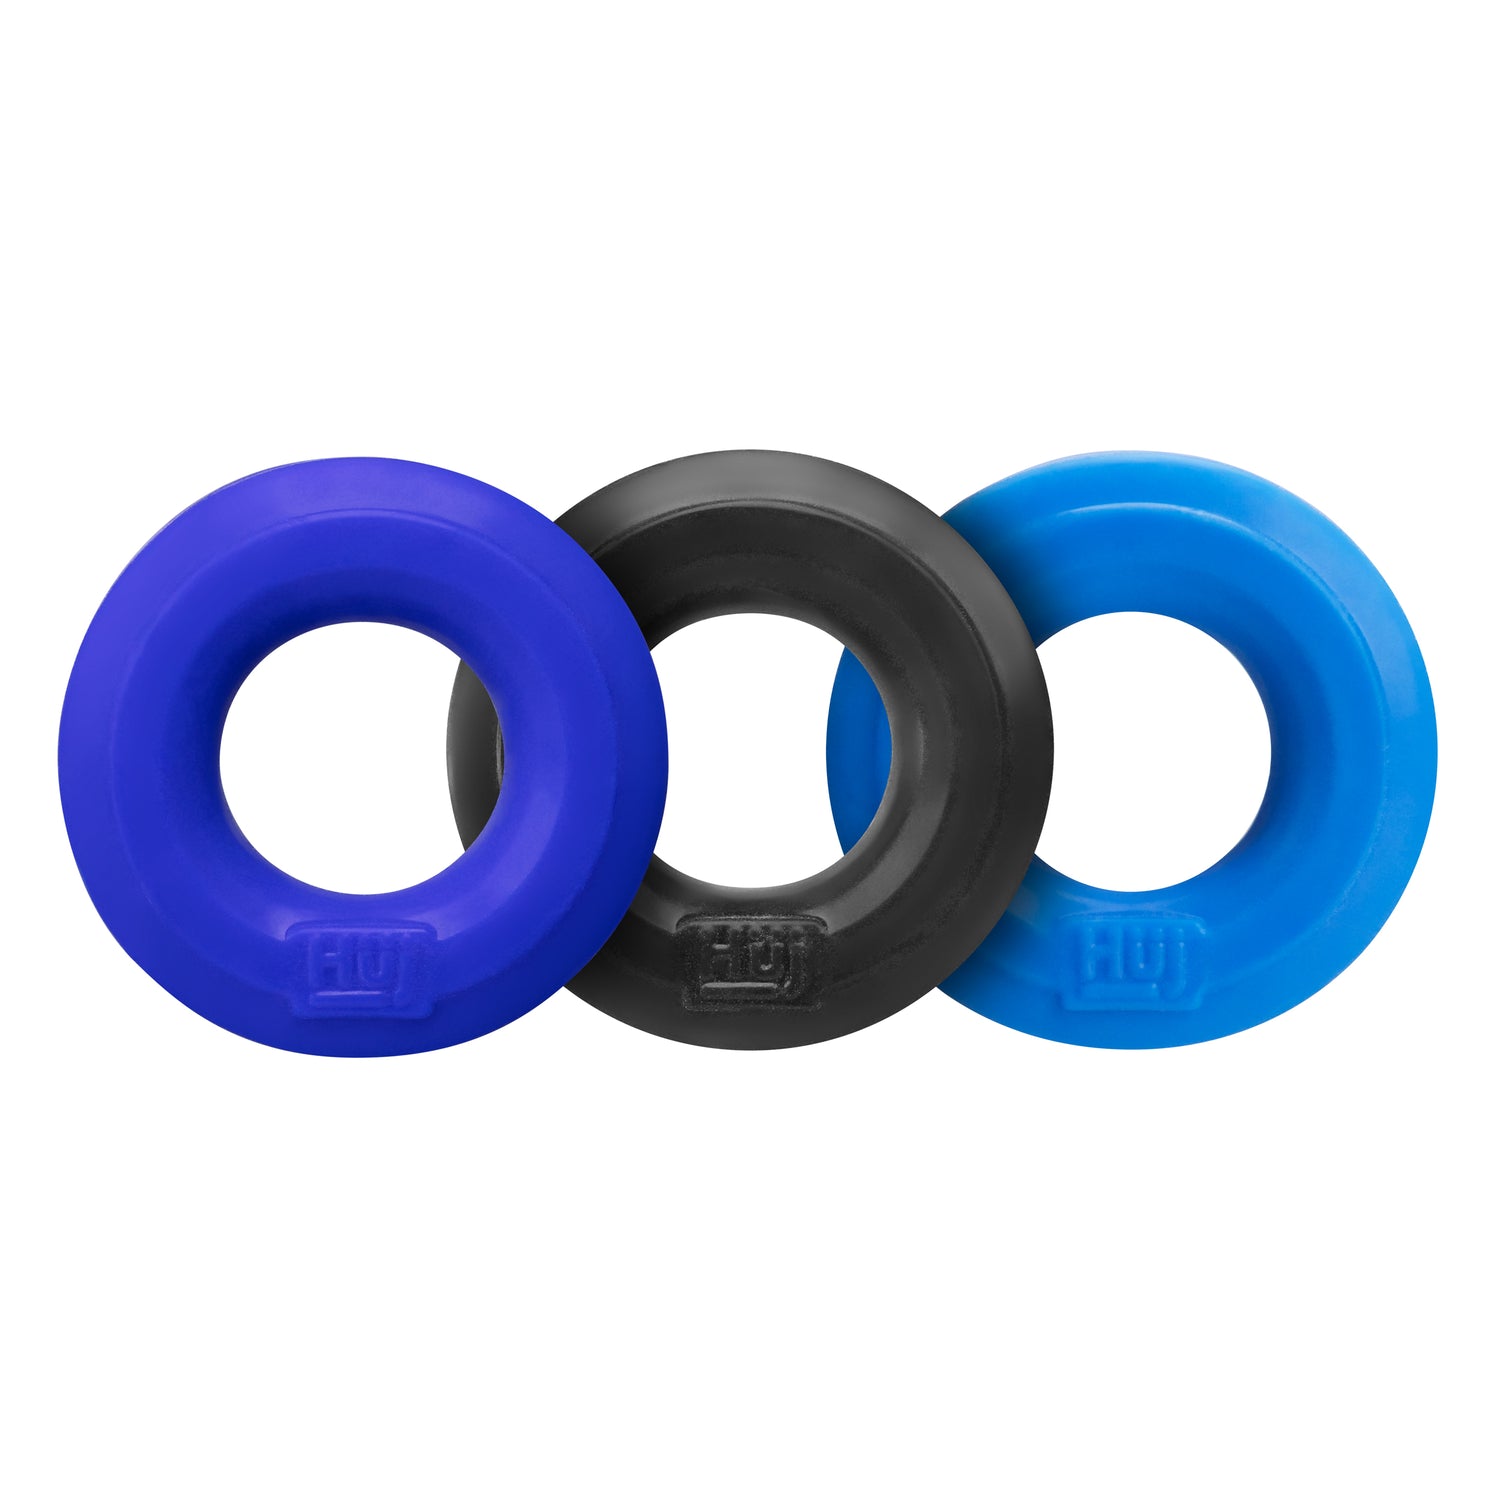 HUJ3 C-RING 3-pack by Hunkyjunk - Just for you desires